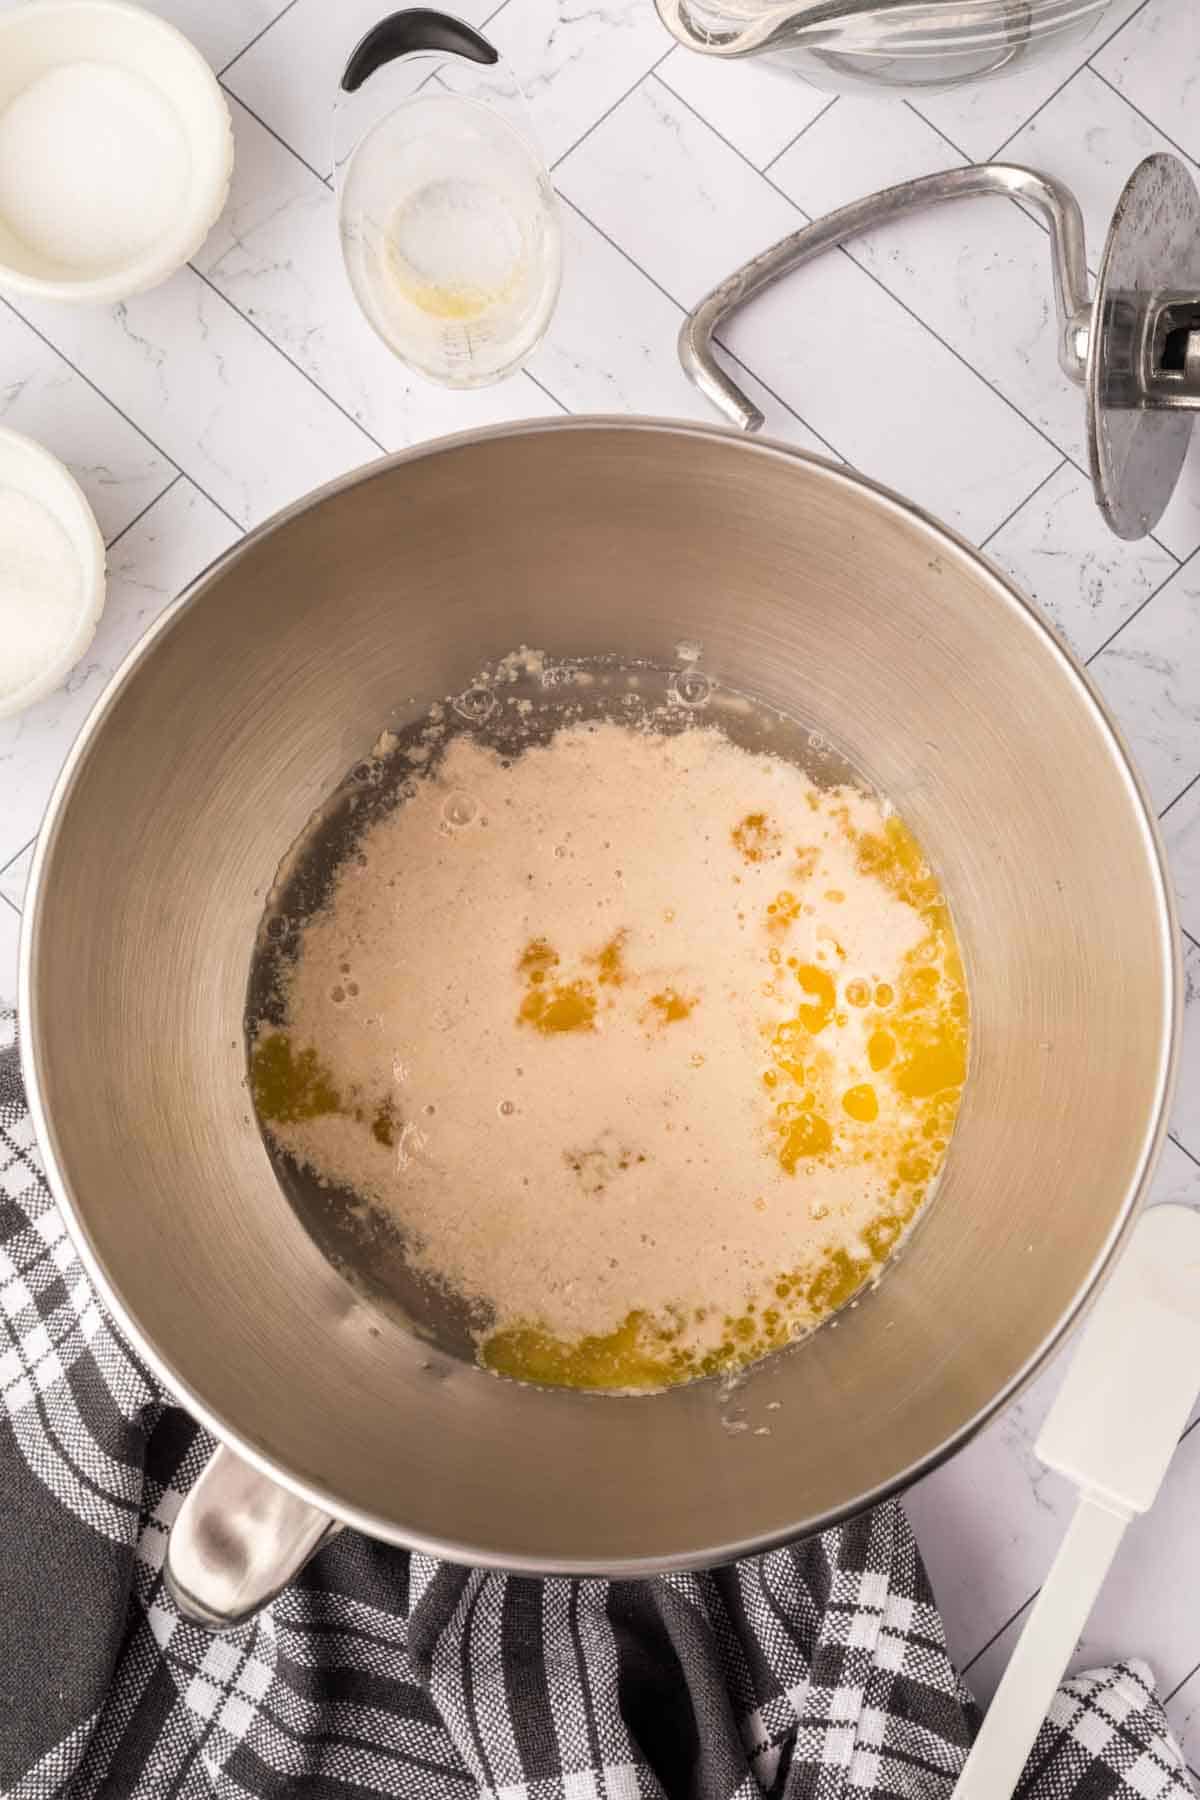 Mixing yeast, water and sugar in a bowl then adding in the melted butter